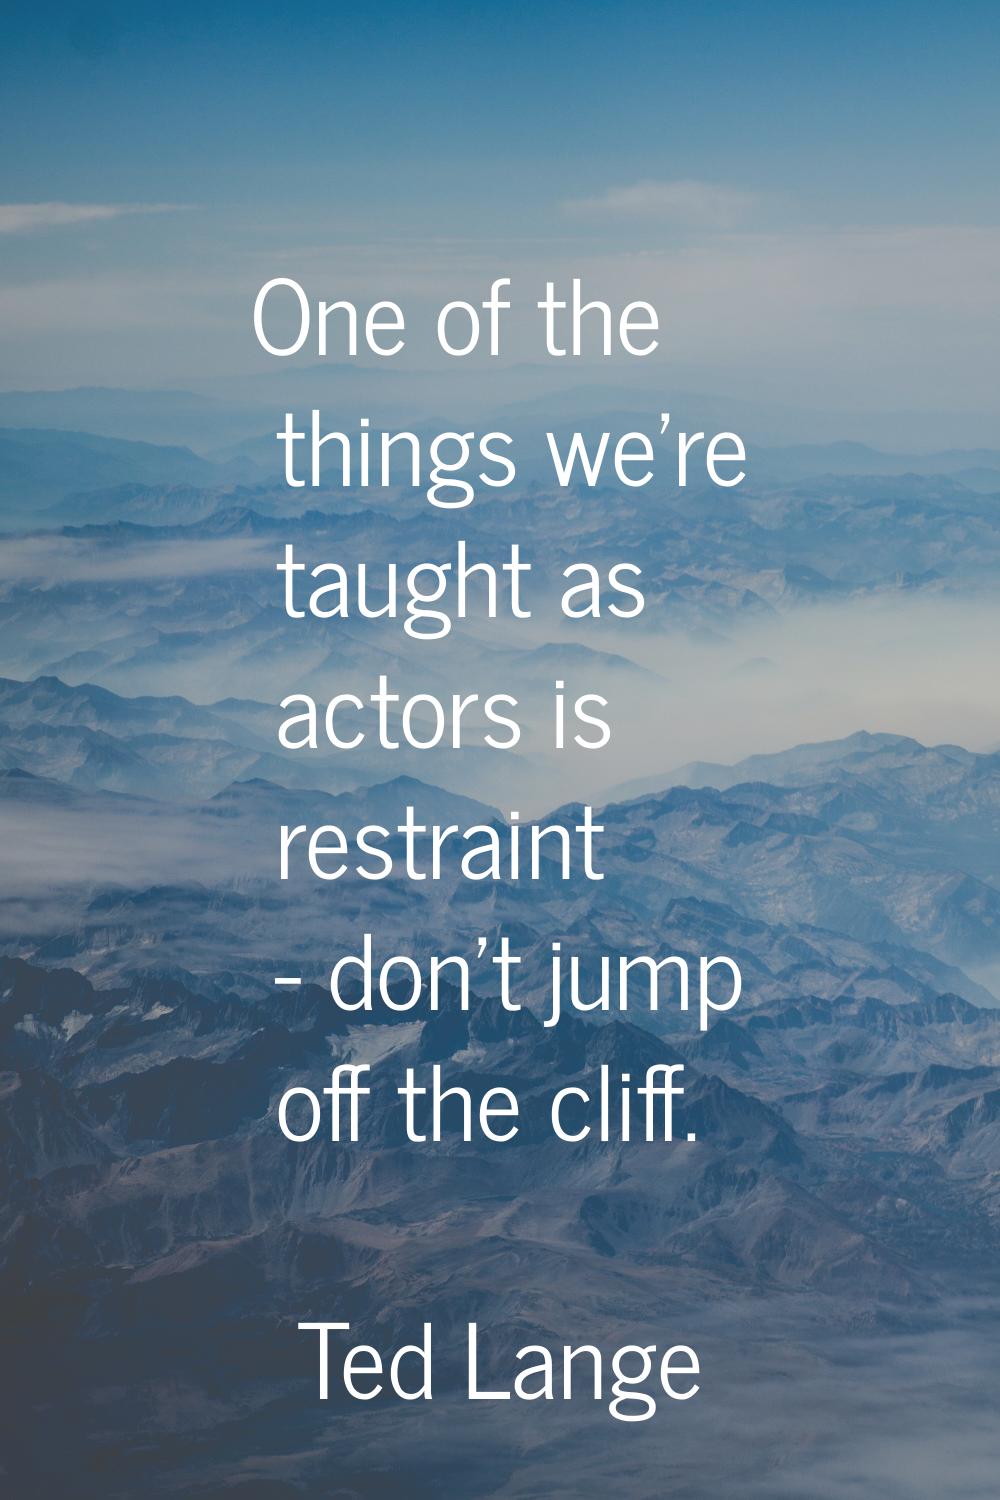 One of the things we're taught as actors is restraint - don't jump off the cliff.